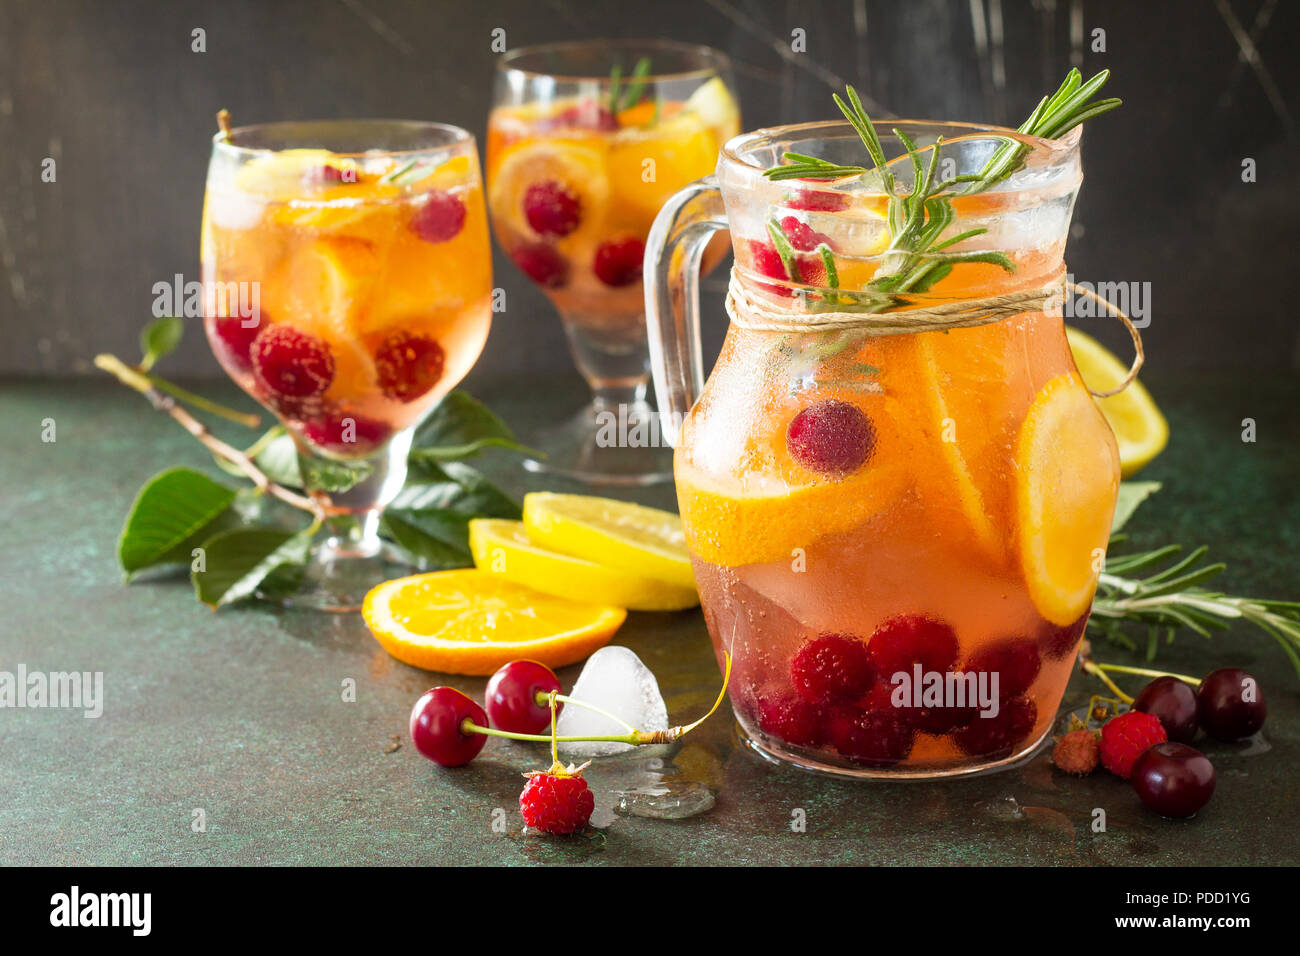 A Pitcher and Two Glasses with Spanish Sangria Stock Image - Image of  holiday, chopped: 122505775